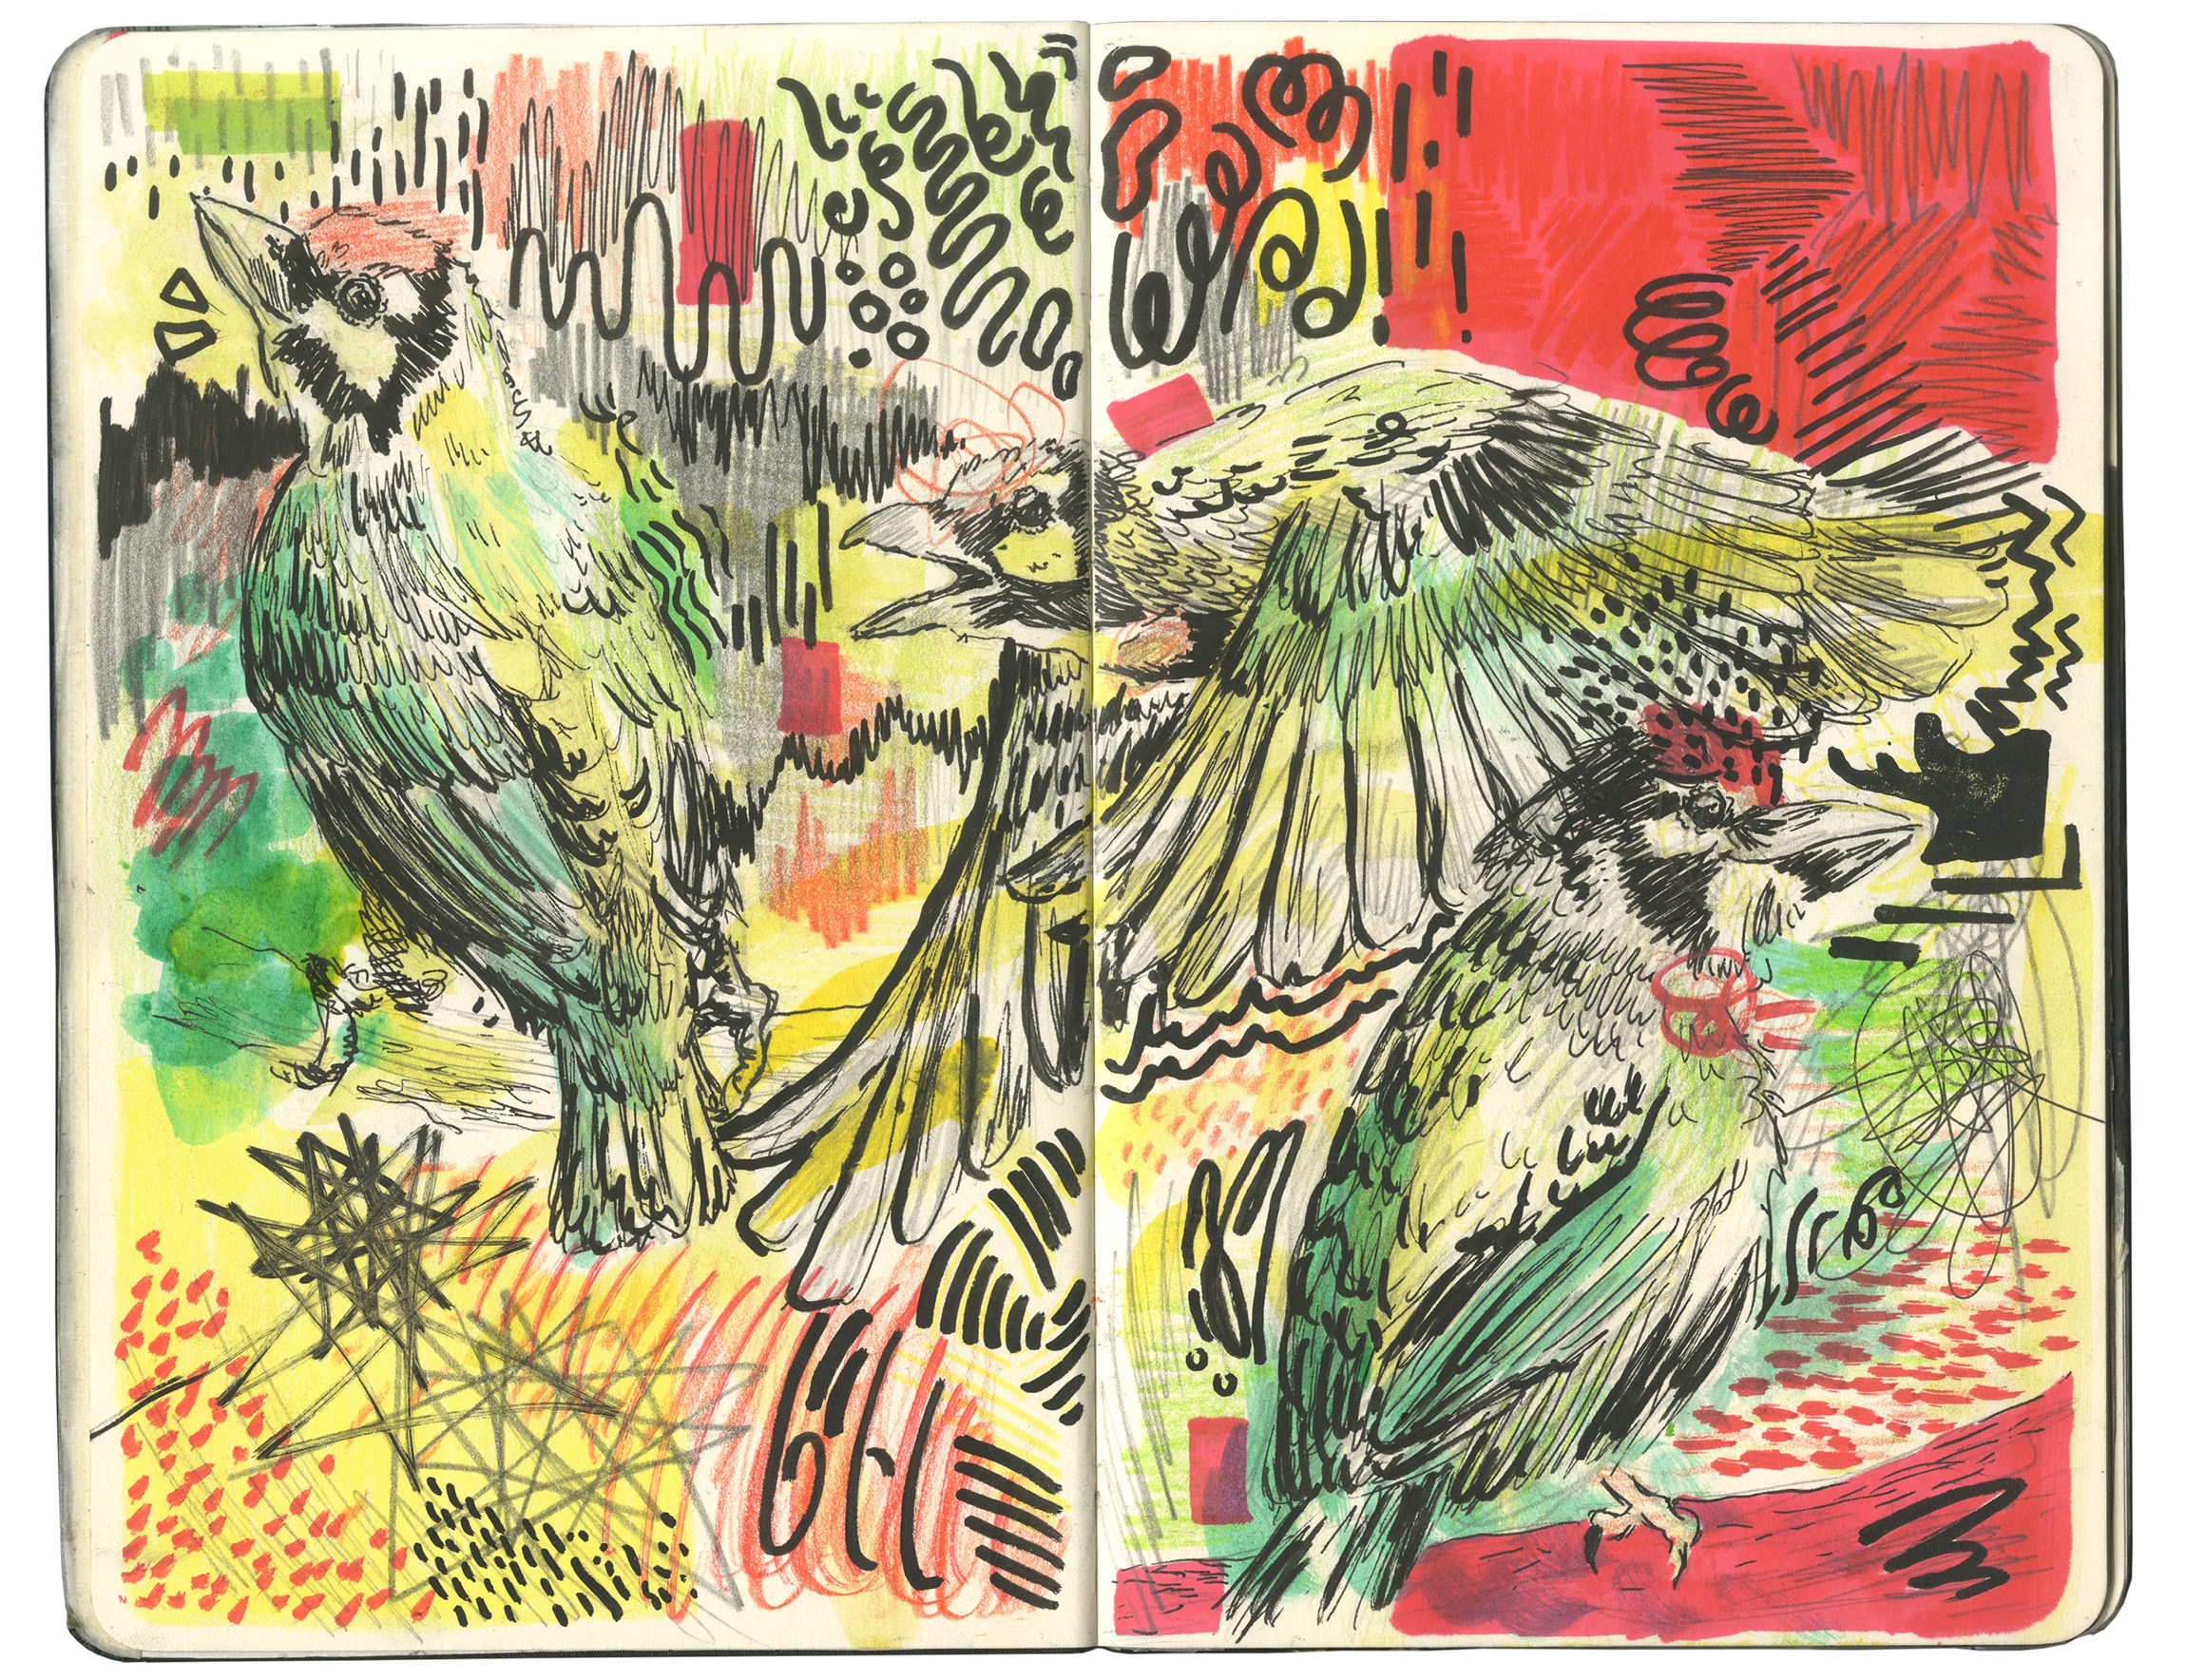 A brightly coloured, high-energy image of three birds; using explosive shapes, lines and scribbles.